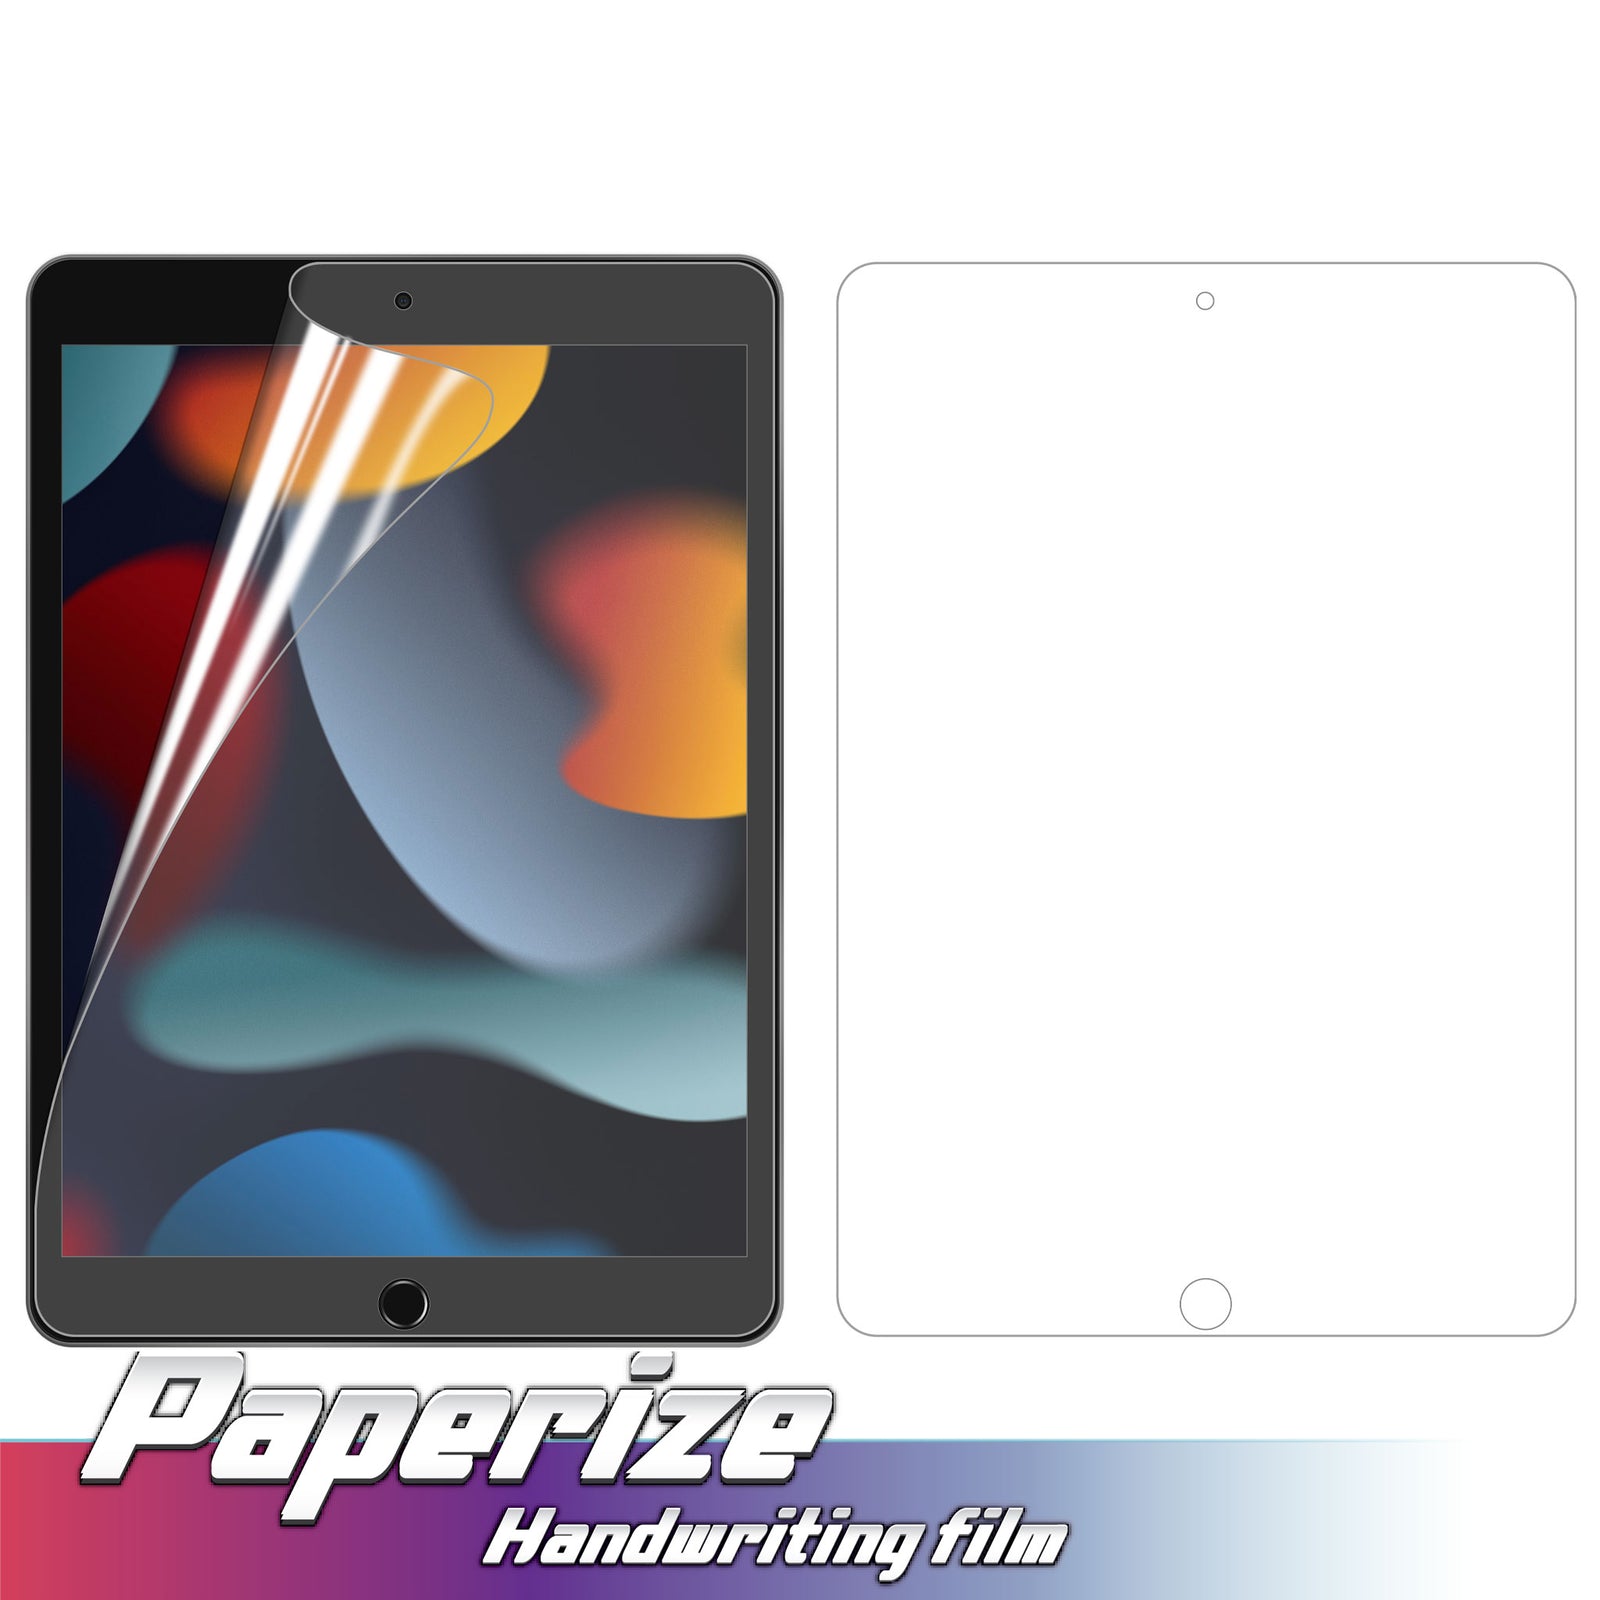 Magnetic DMF Privacy Film For iPad 10.2-inch - Capdase